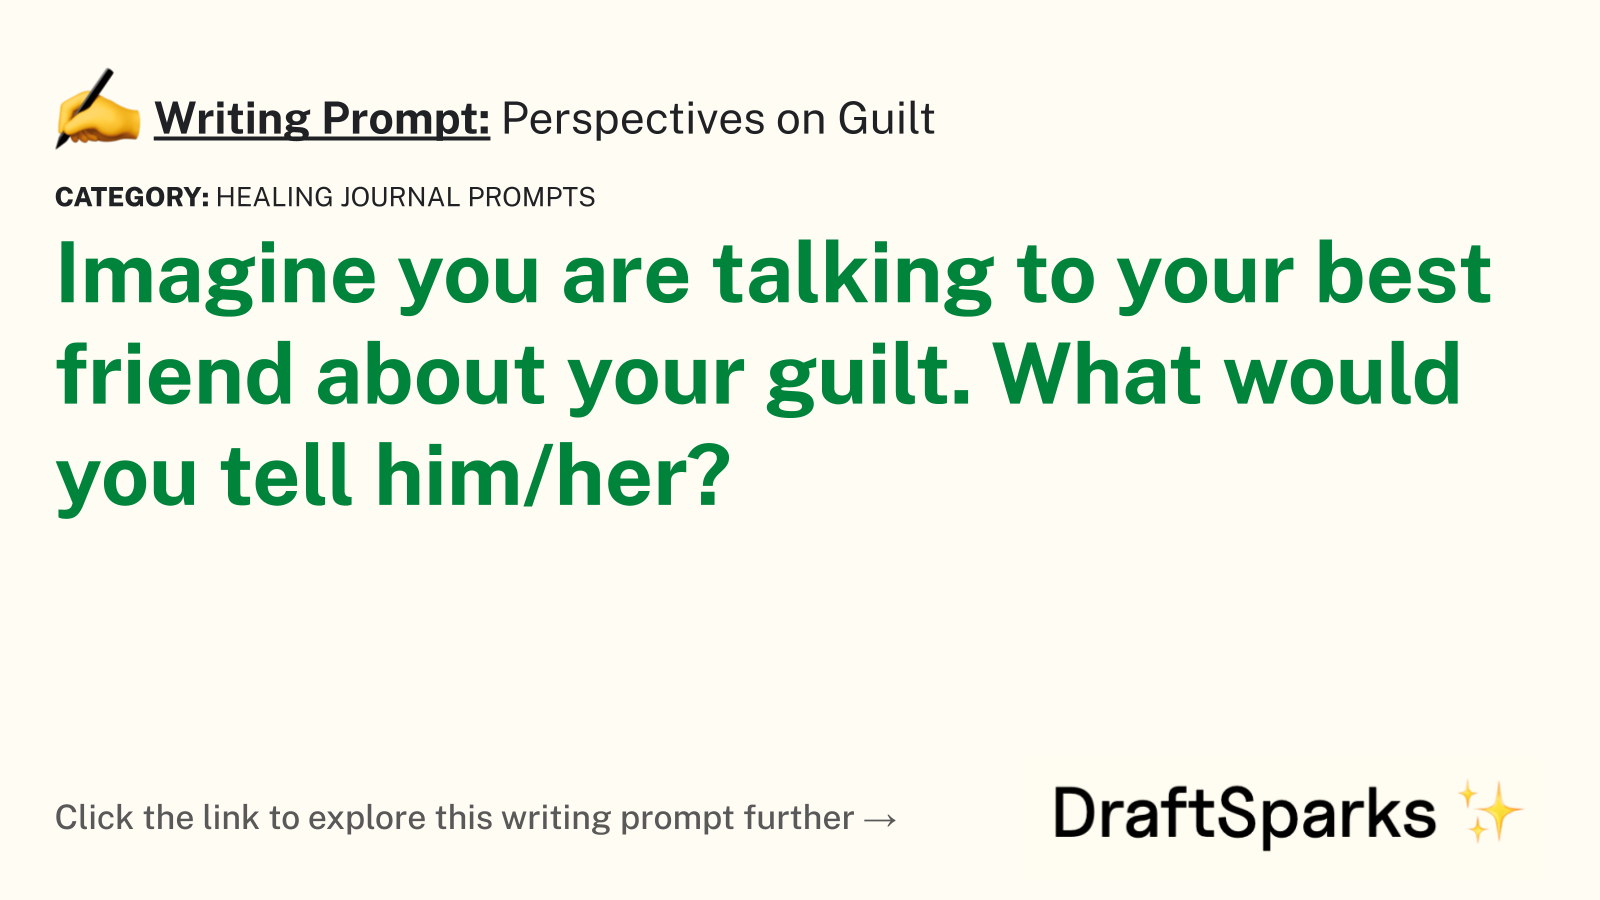 Perspectives on Guilt